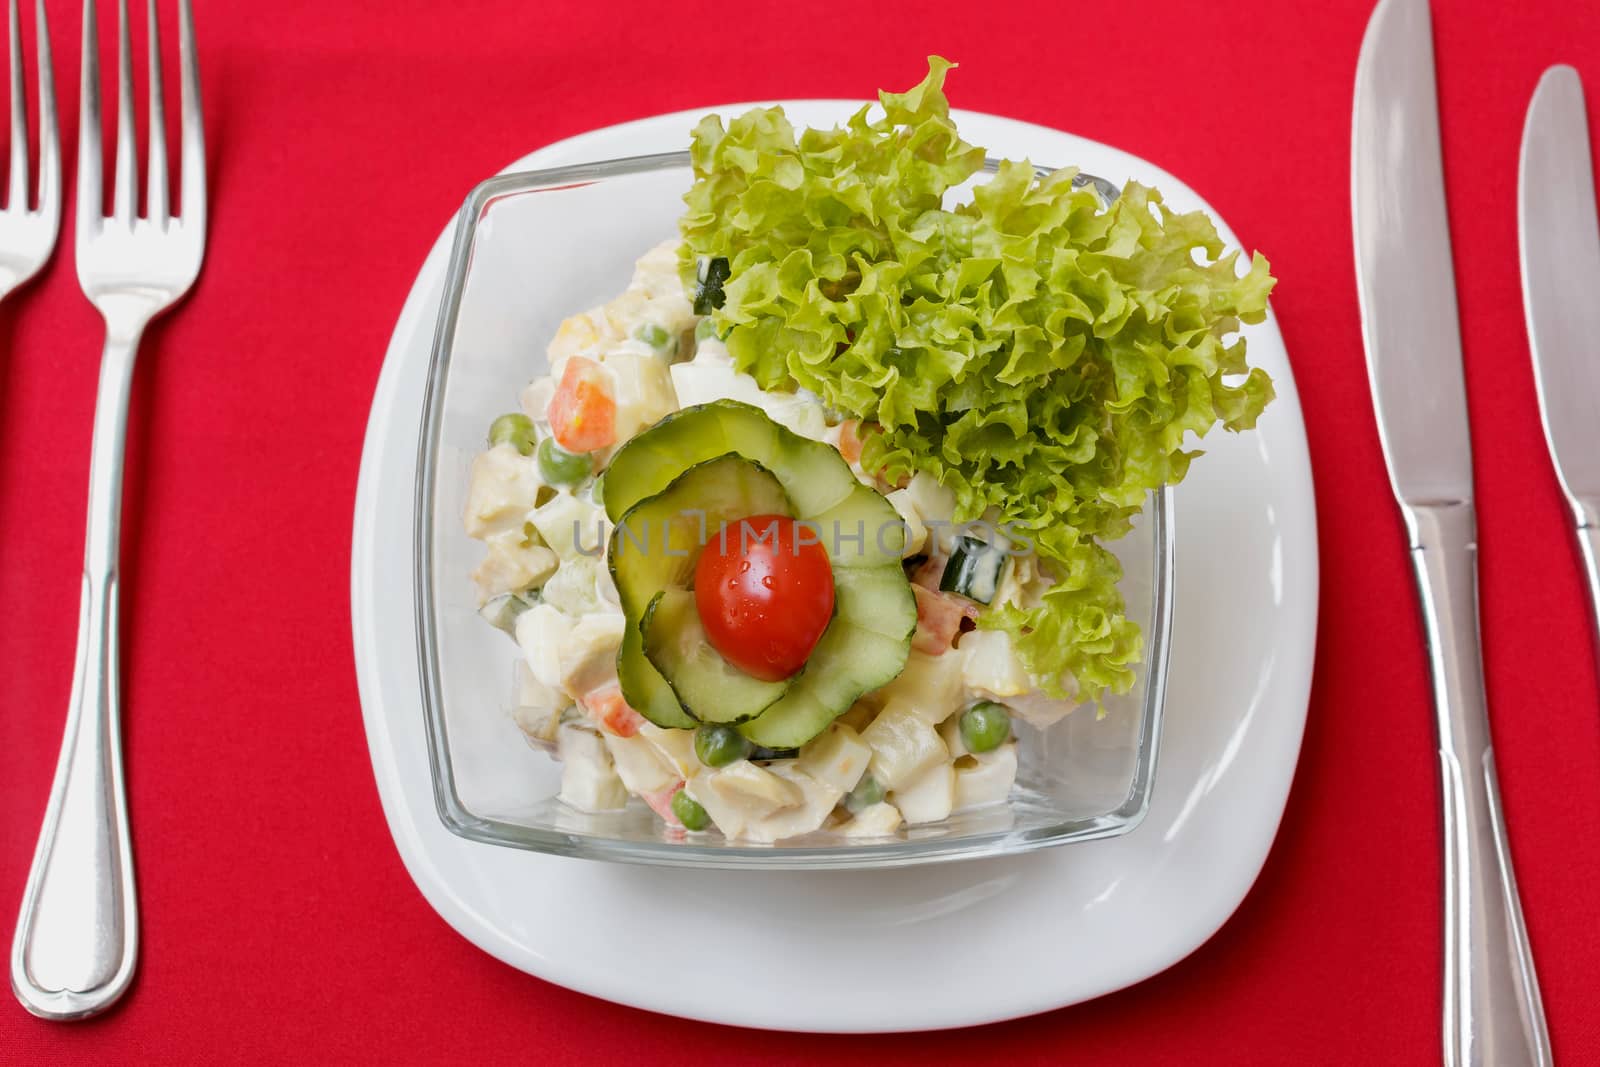 Salad with crab meat, corn and fresh vegetables. View from above